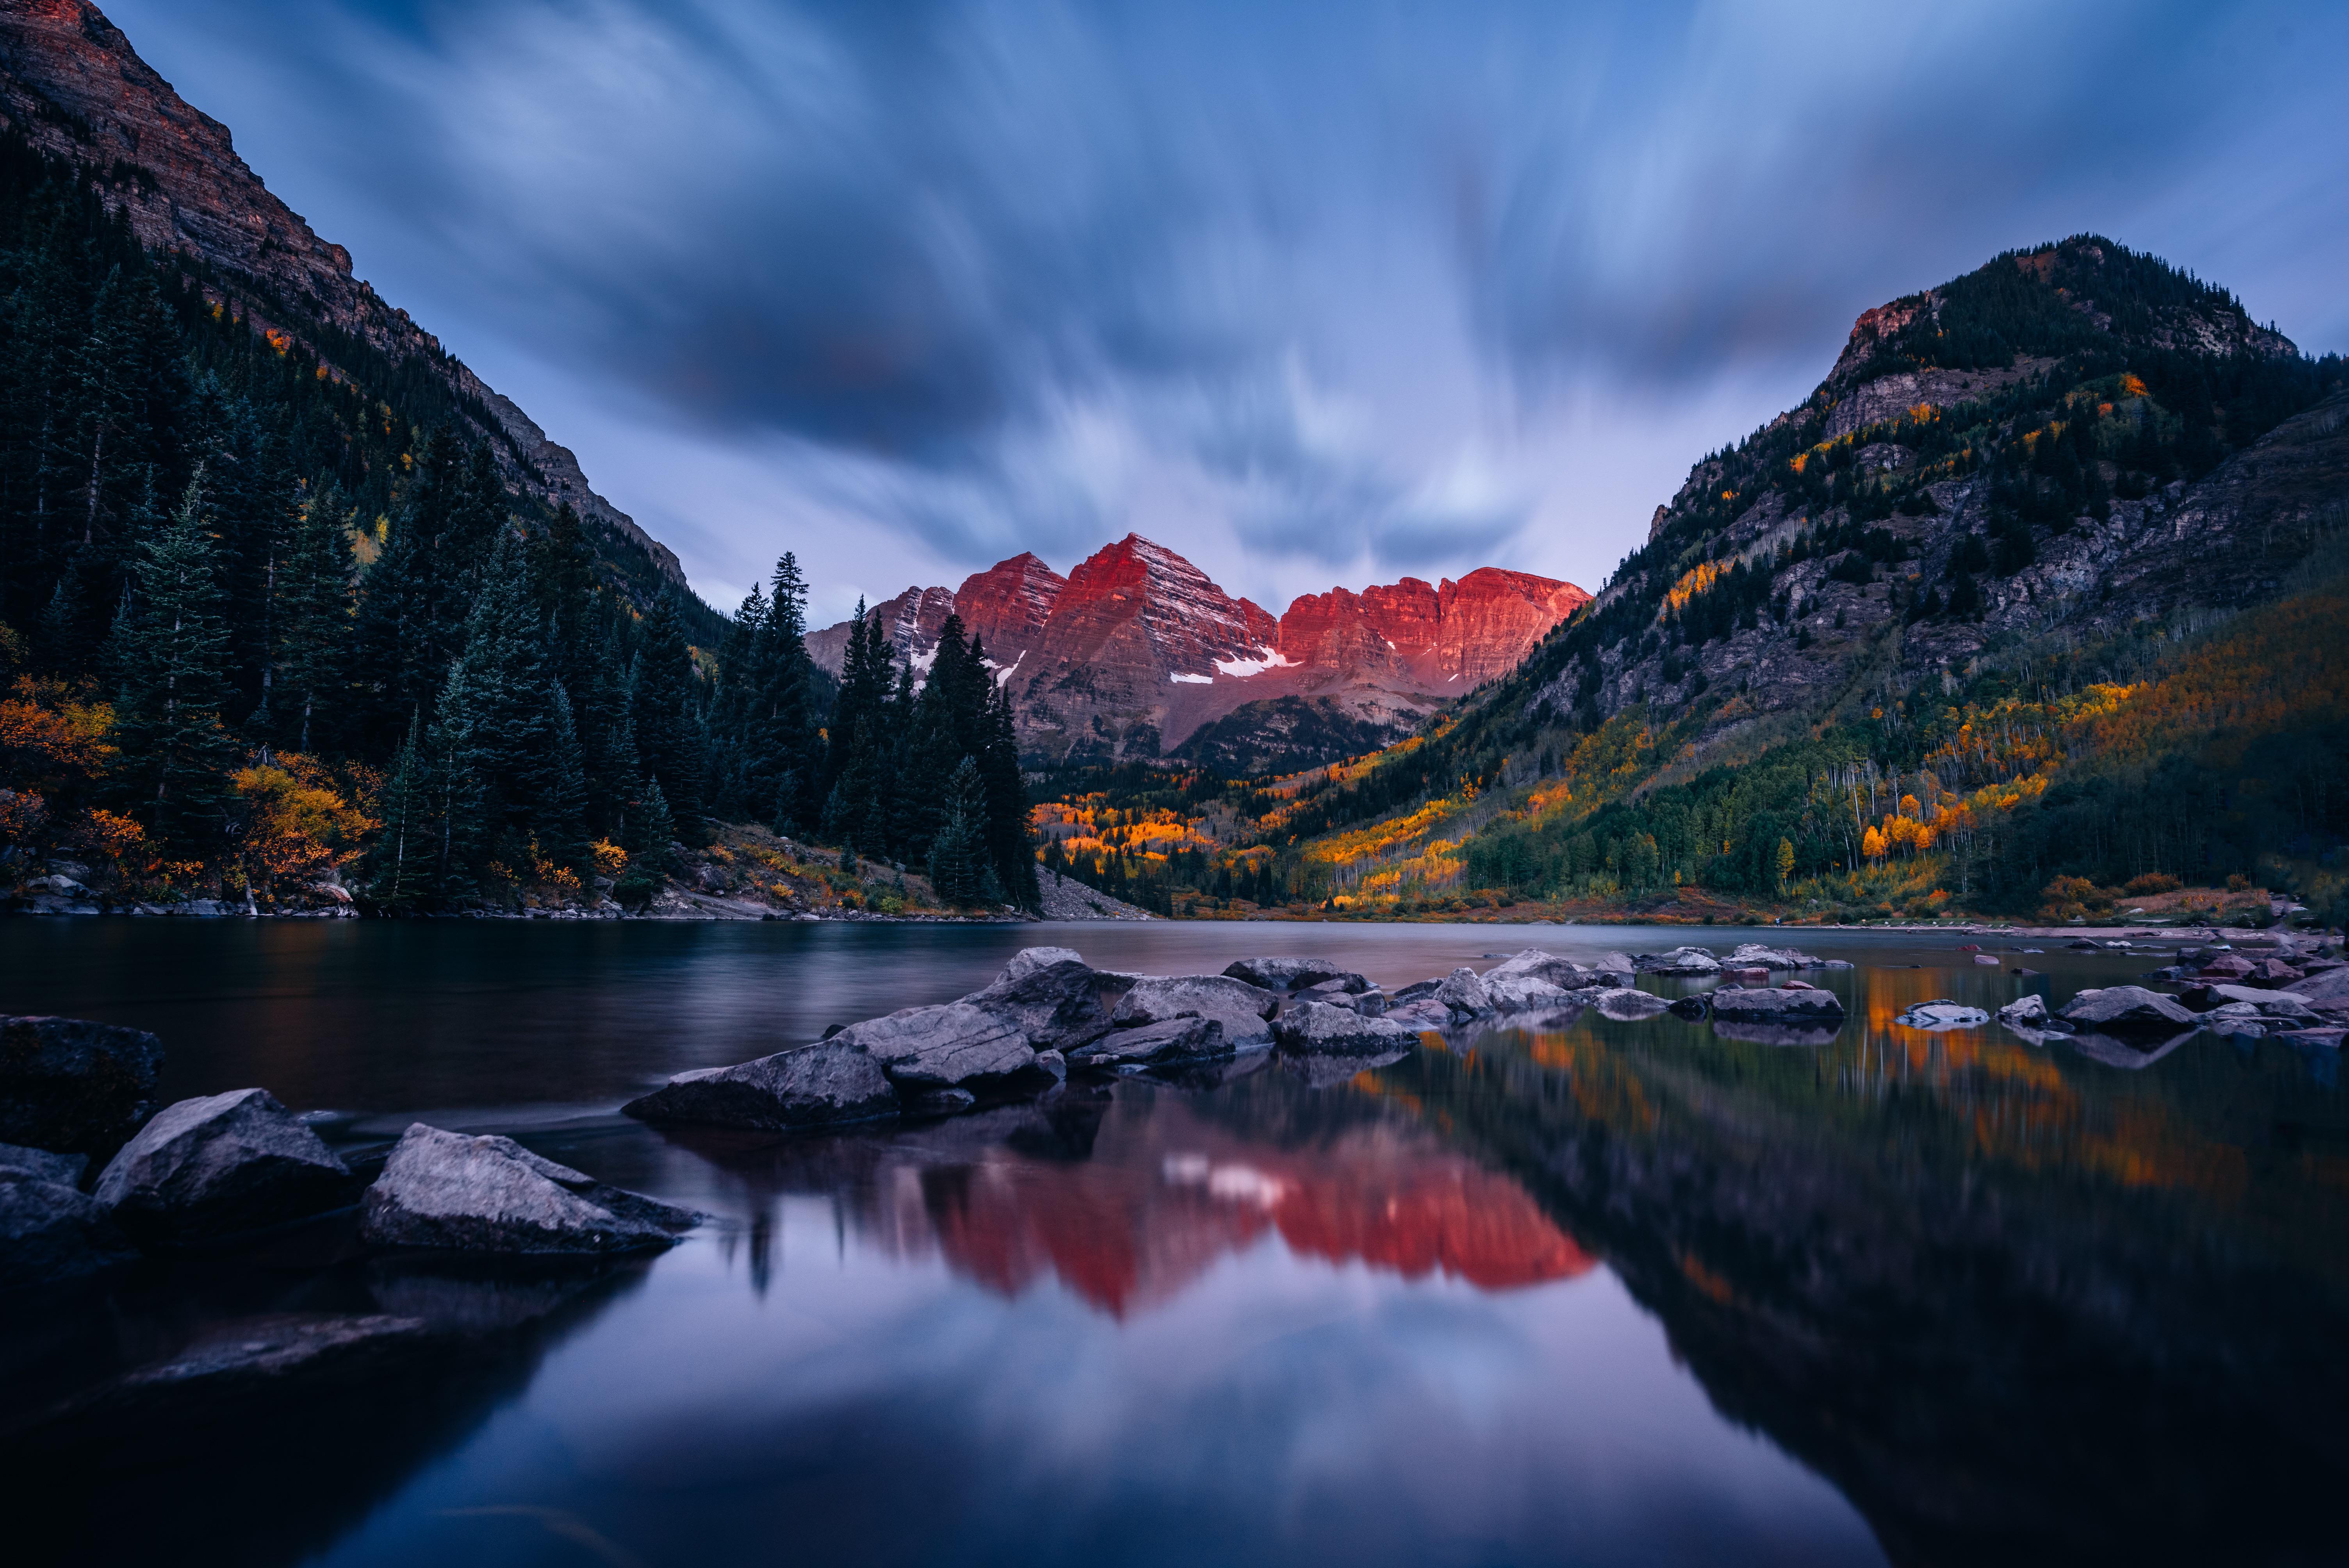 Landscape Mountains Lake Sky Sunset Nature Pine Trees Reflection Long Exposure Maroon Bells 6016x4016